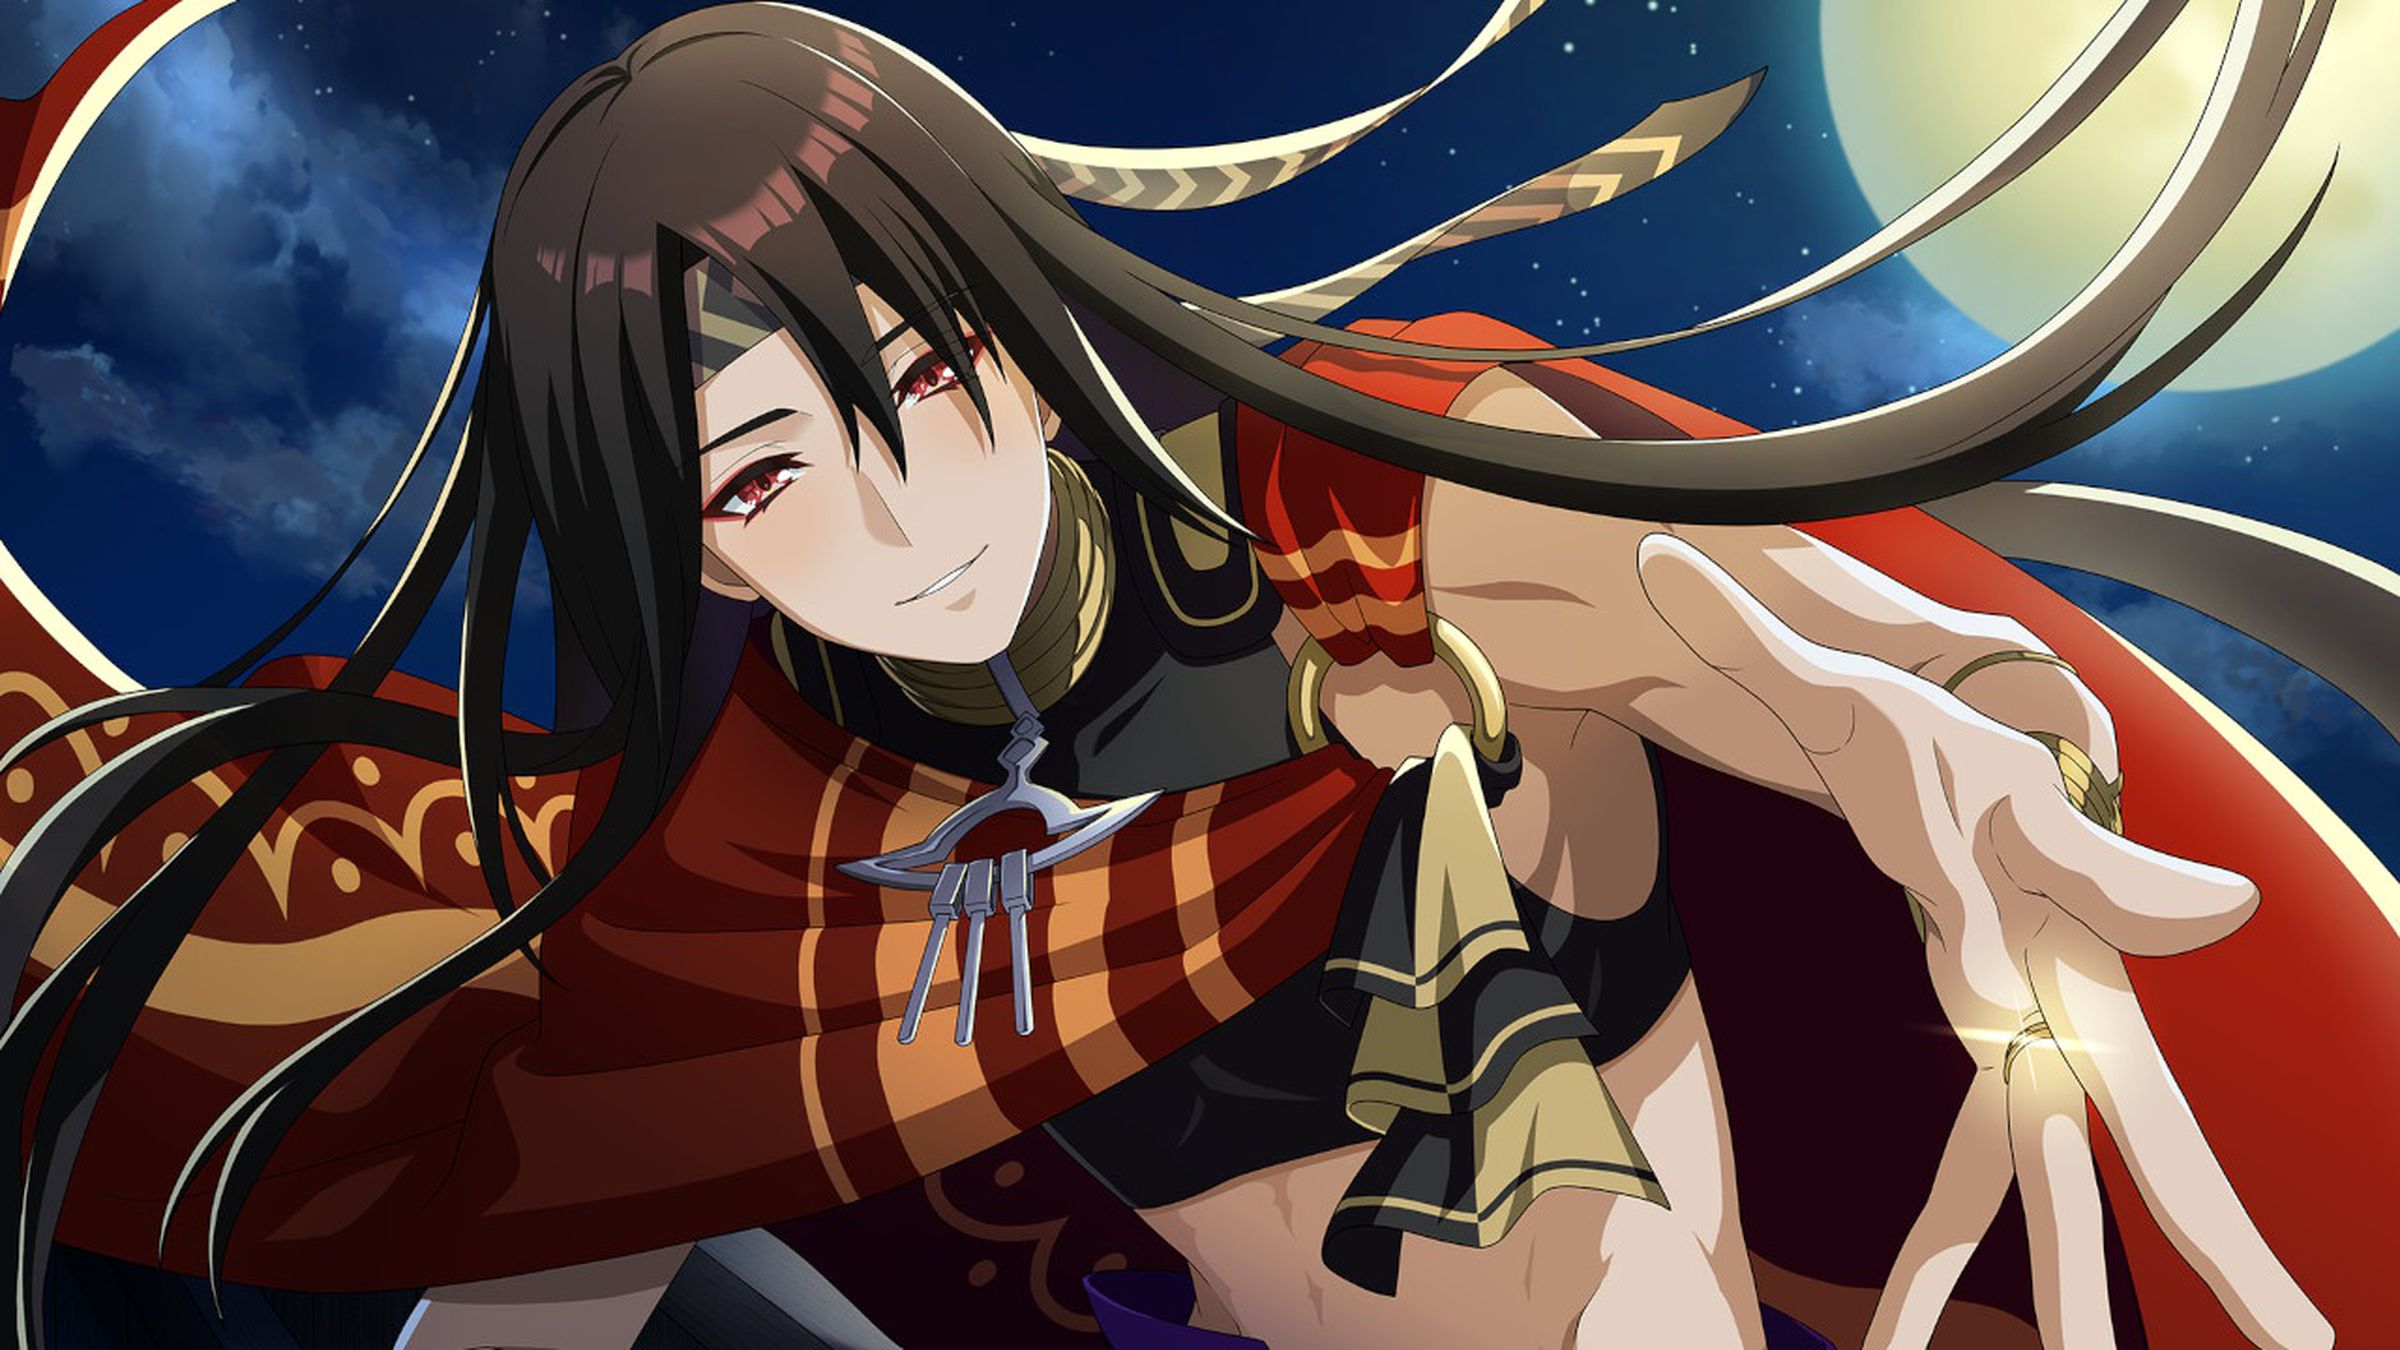 Screenshot from Fire Emblem Engage featuring a man with long black hair and flowy garments reaching out to the camera